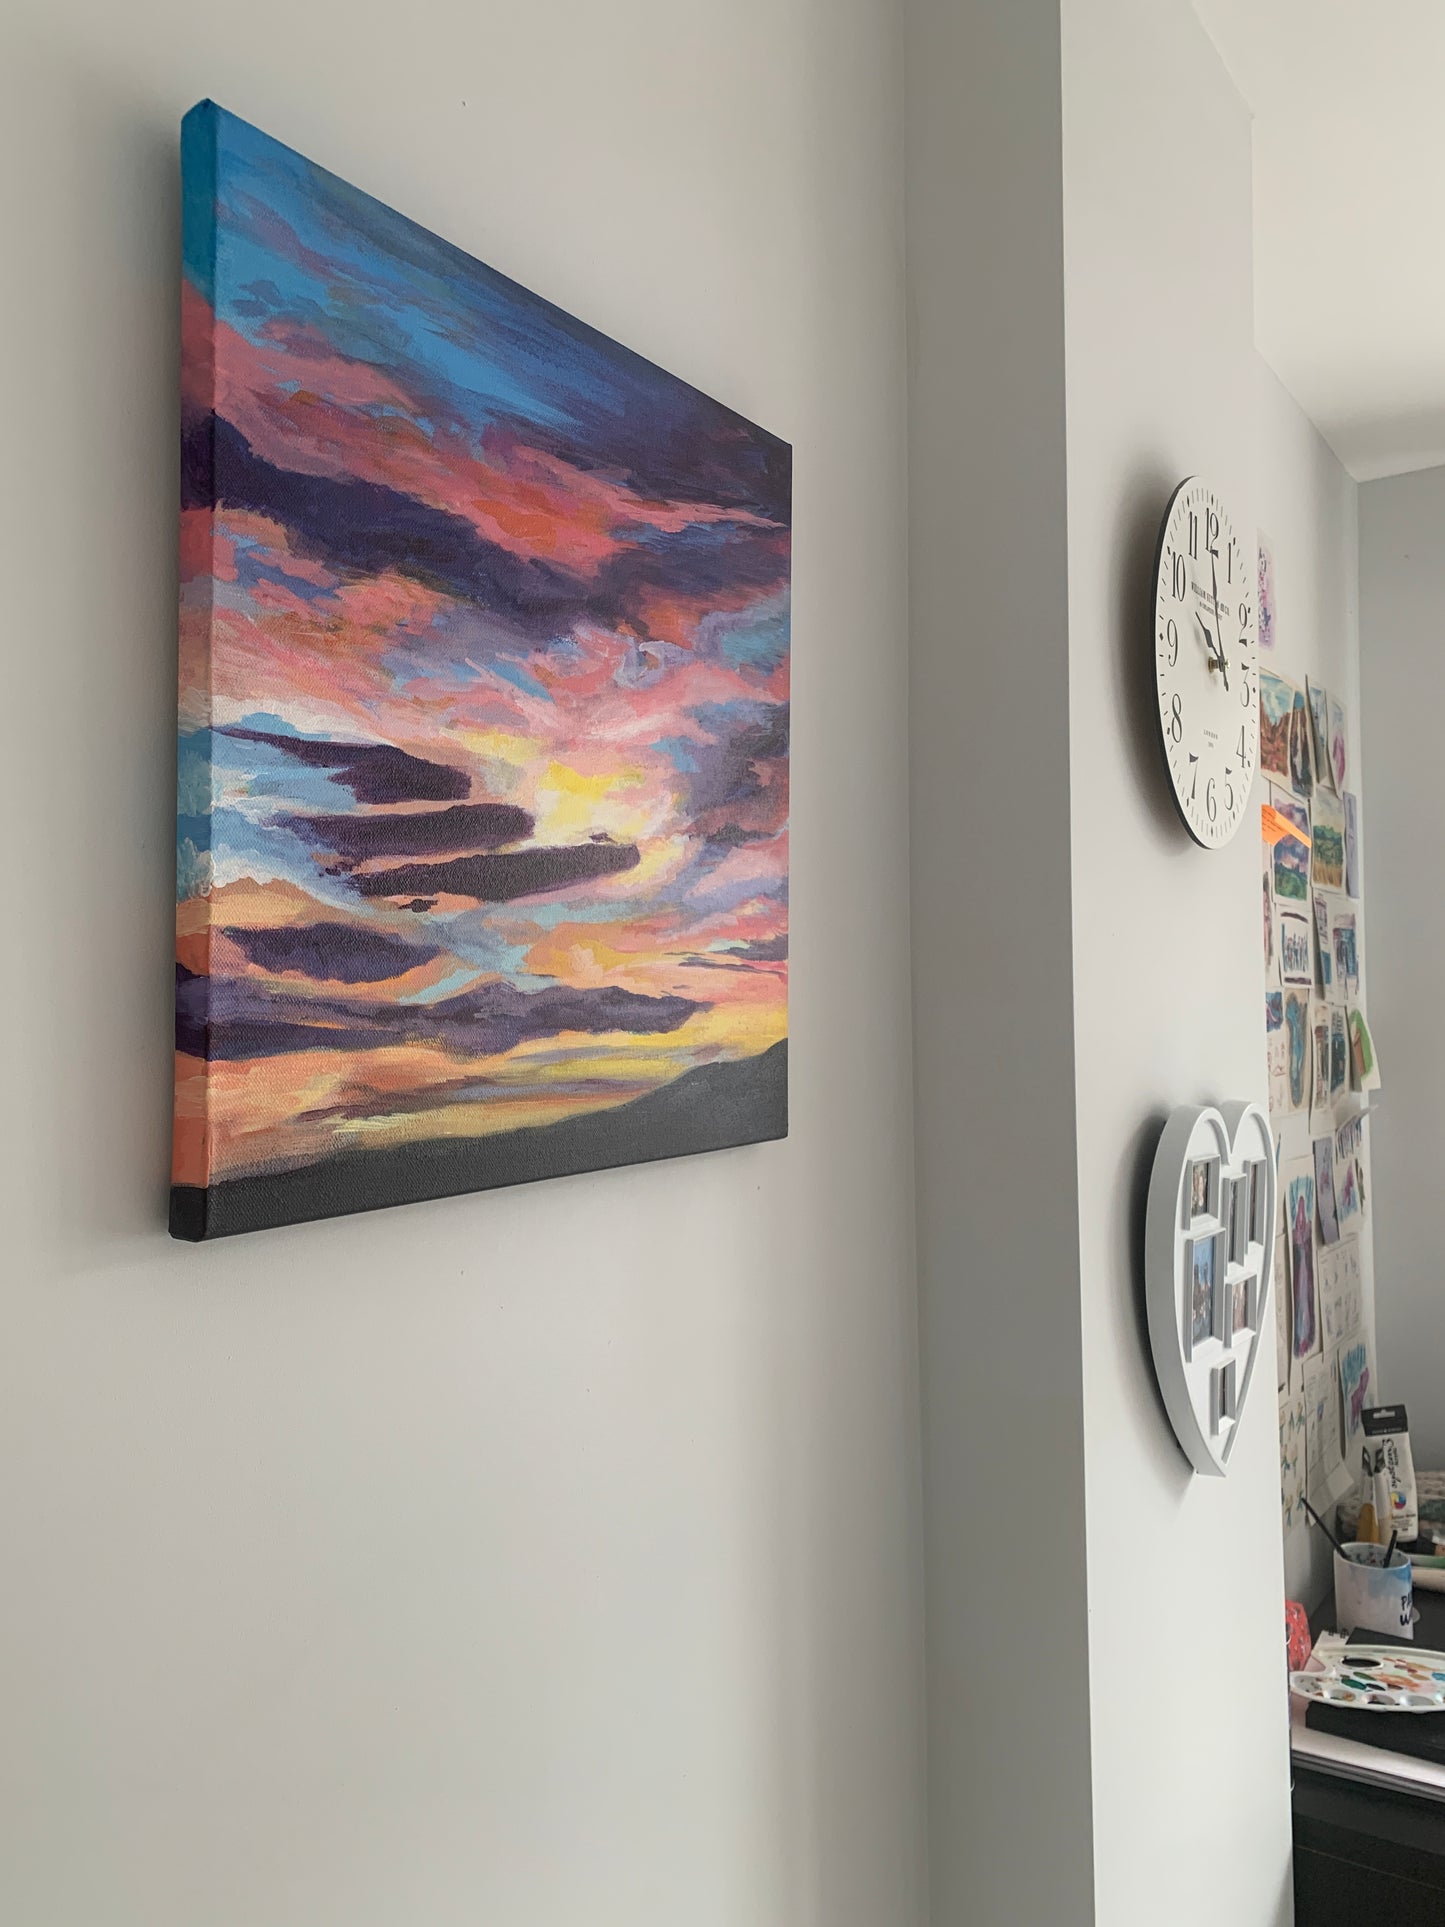 Abstracted Tranquil Sunset - Original Acrylic Painting on Canvas